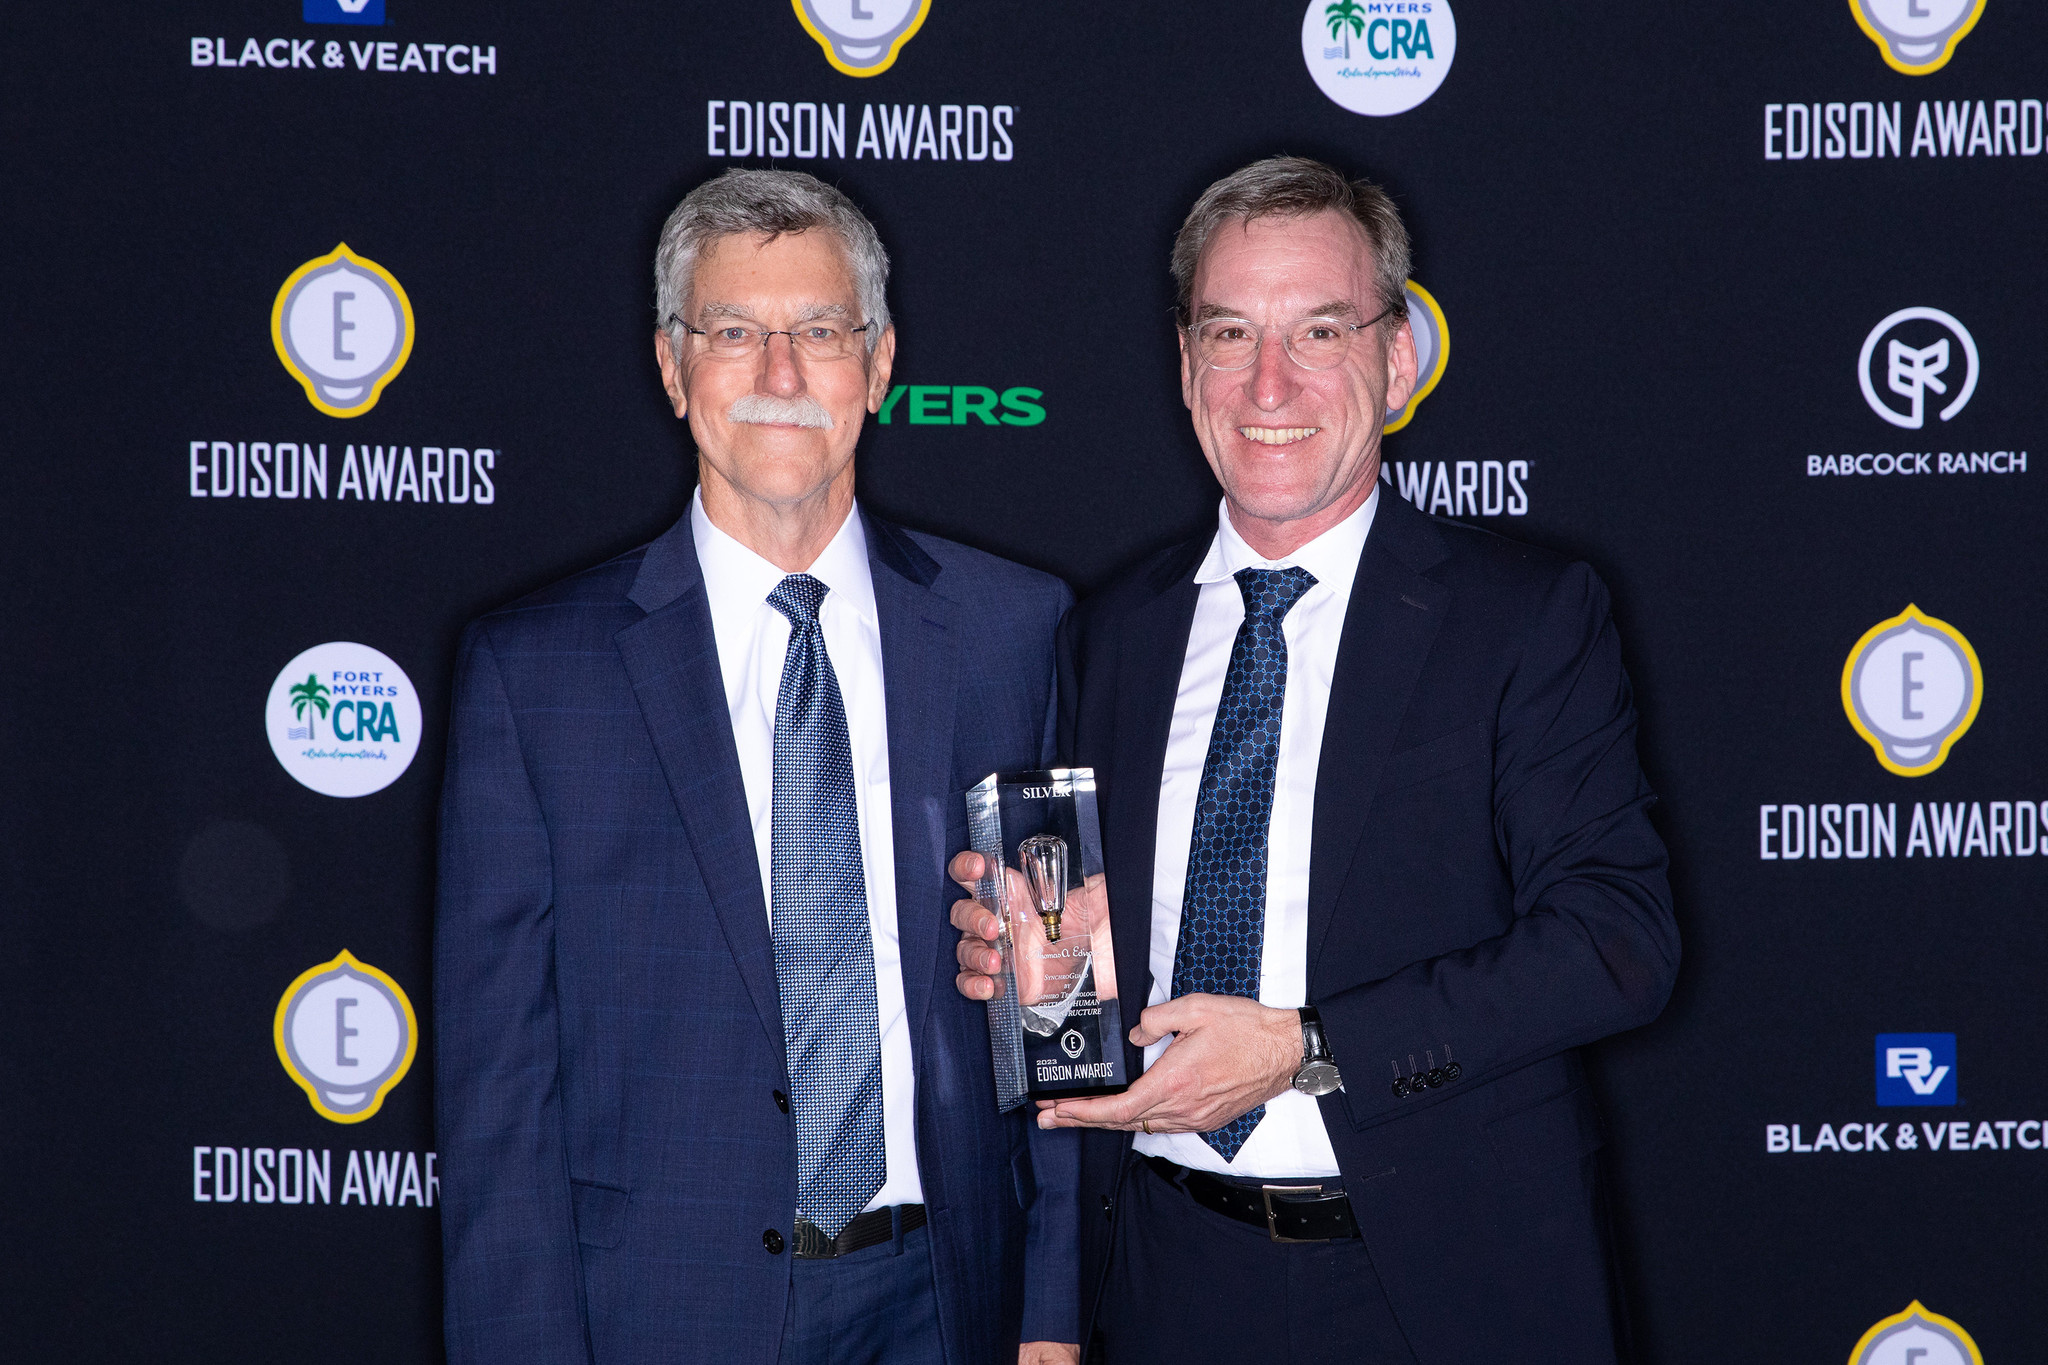 Mark Burke (left) and François Marti (right) at the Edison Awards Gala